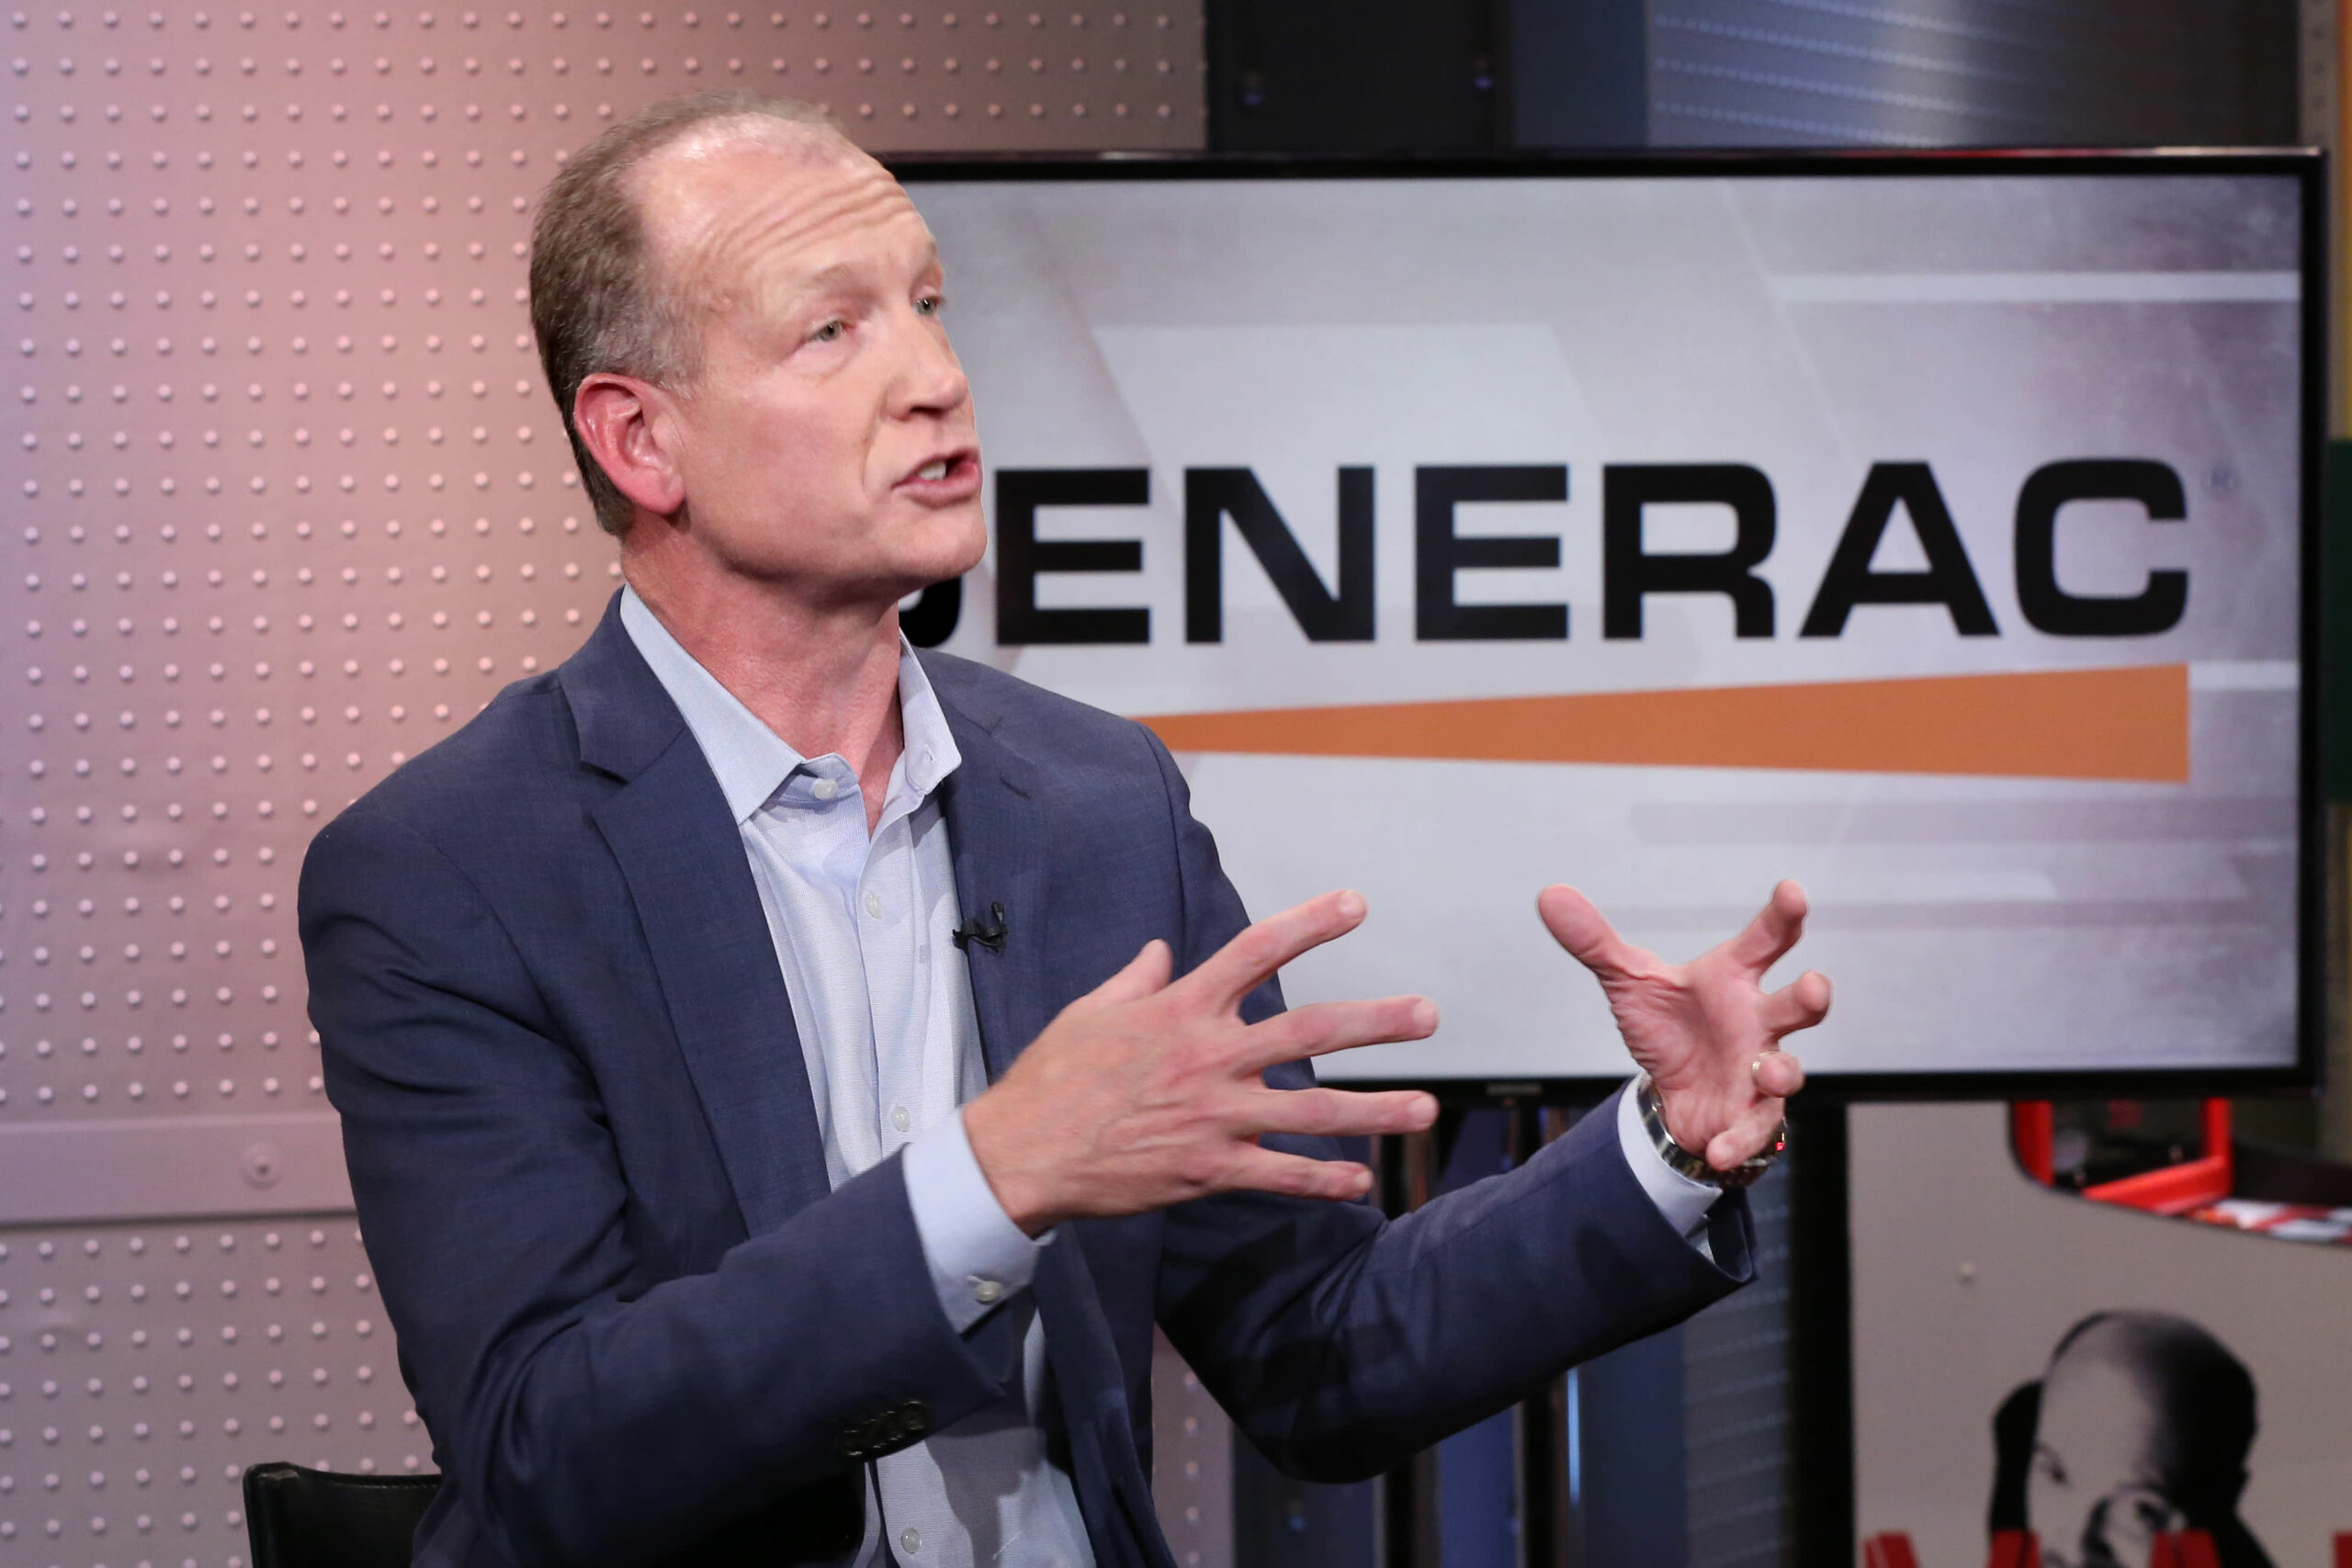 5G rollout boosts demand for backup energy technology, Generac CEO says